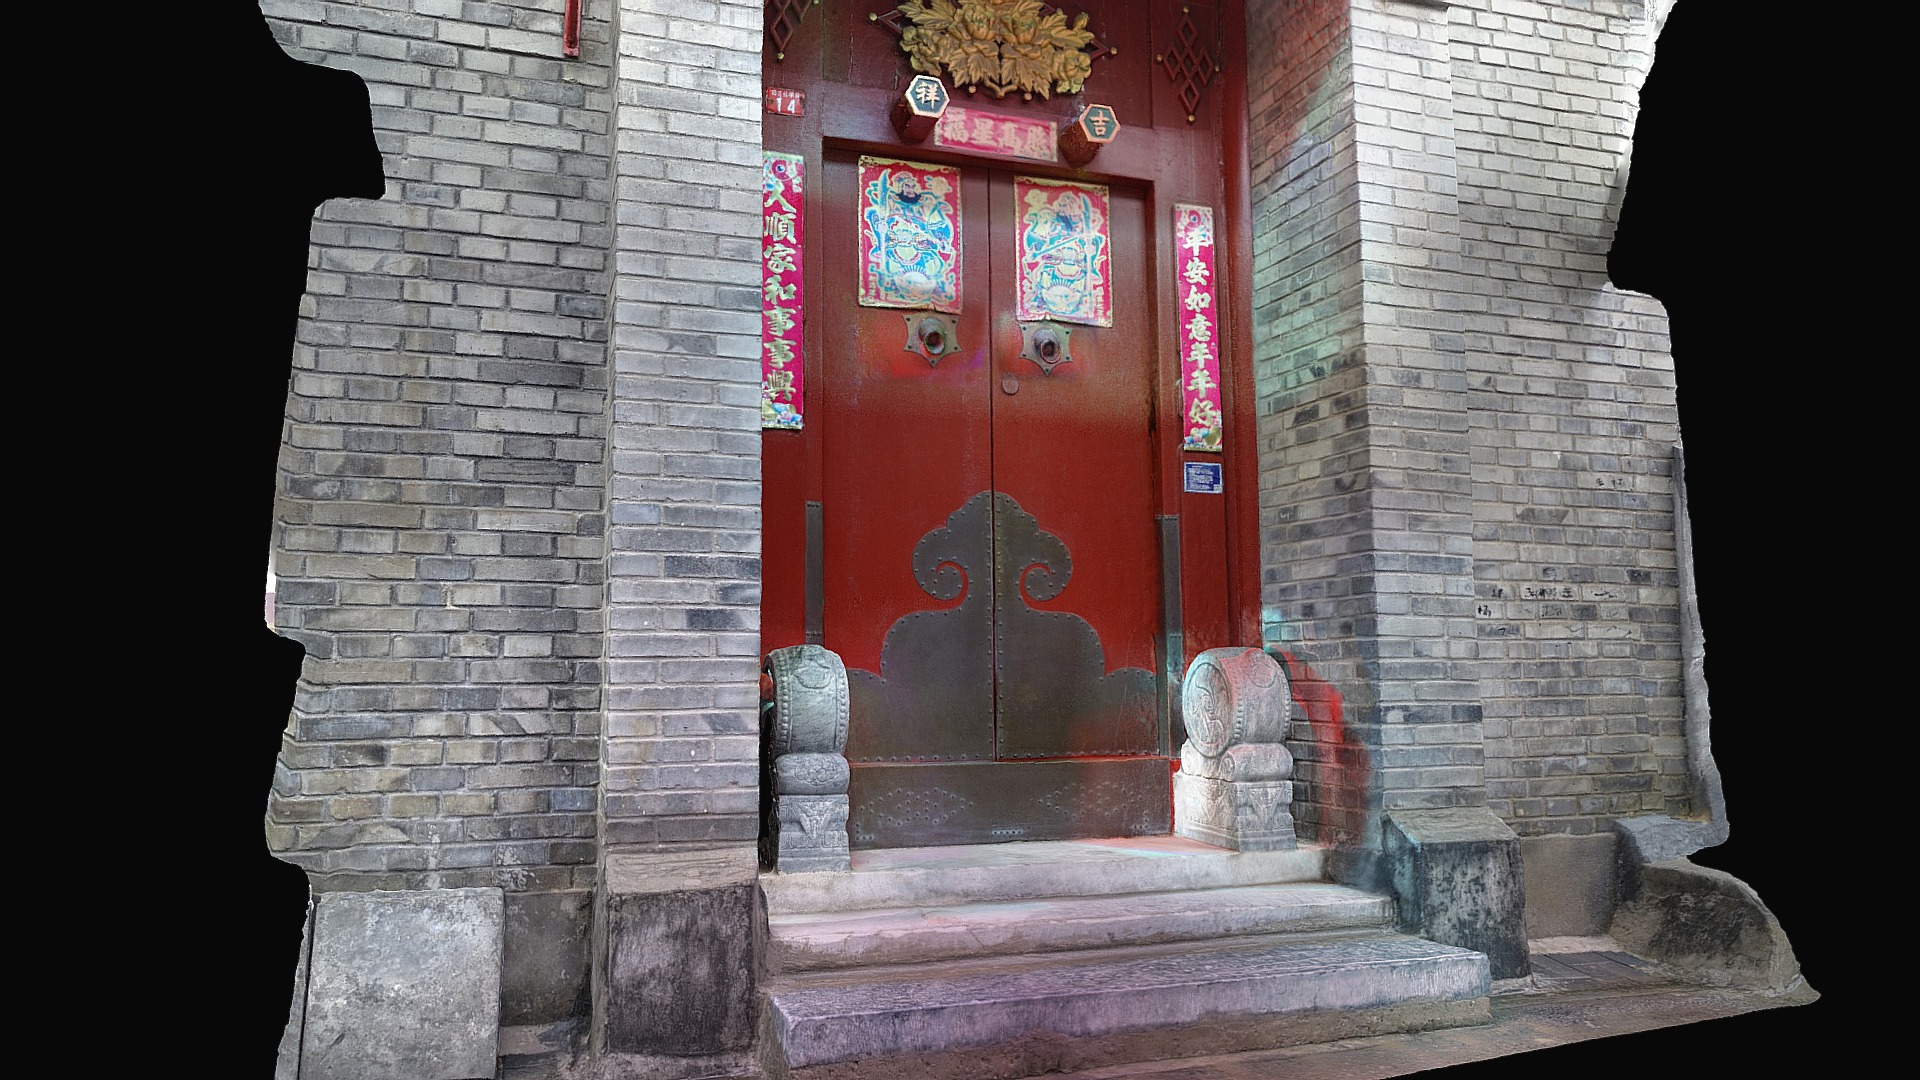 3D model 2016-09 – Beijing 03 - This is a 3D model of the 2016-09 - Beijing 03. The 3D model is about a red door on a brick building.